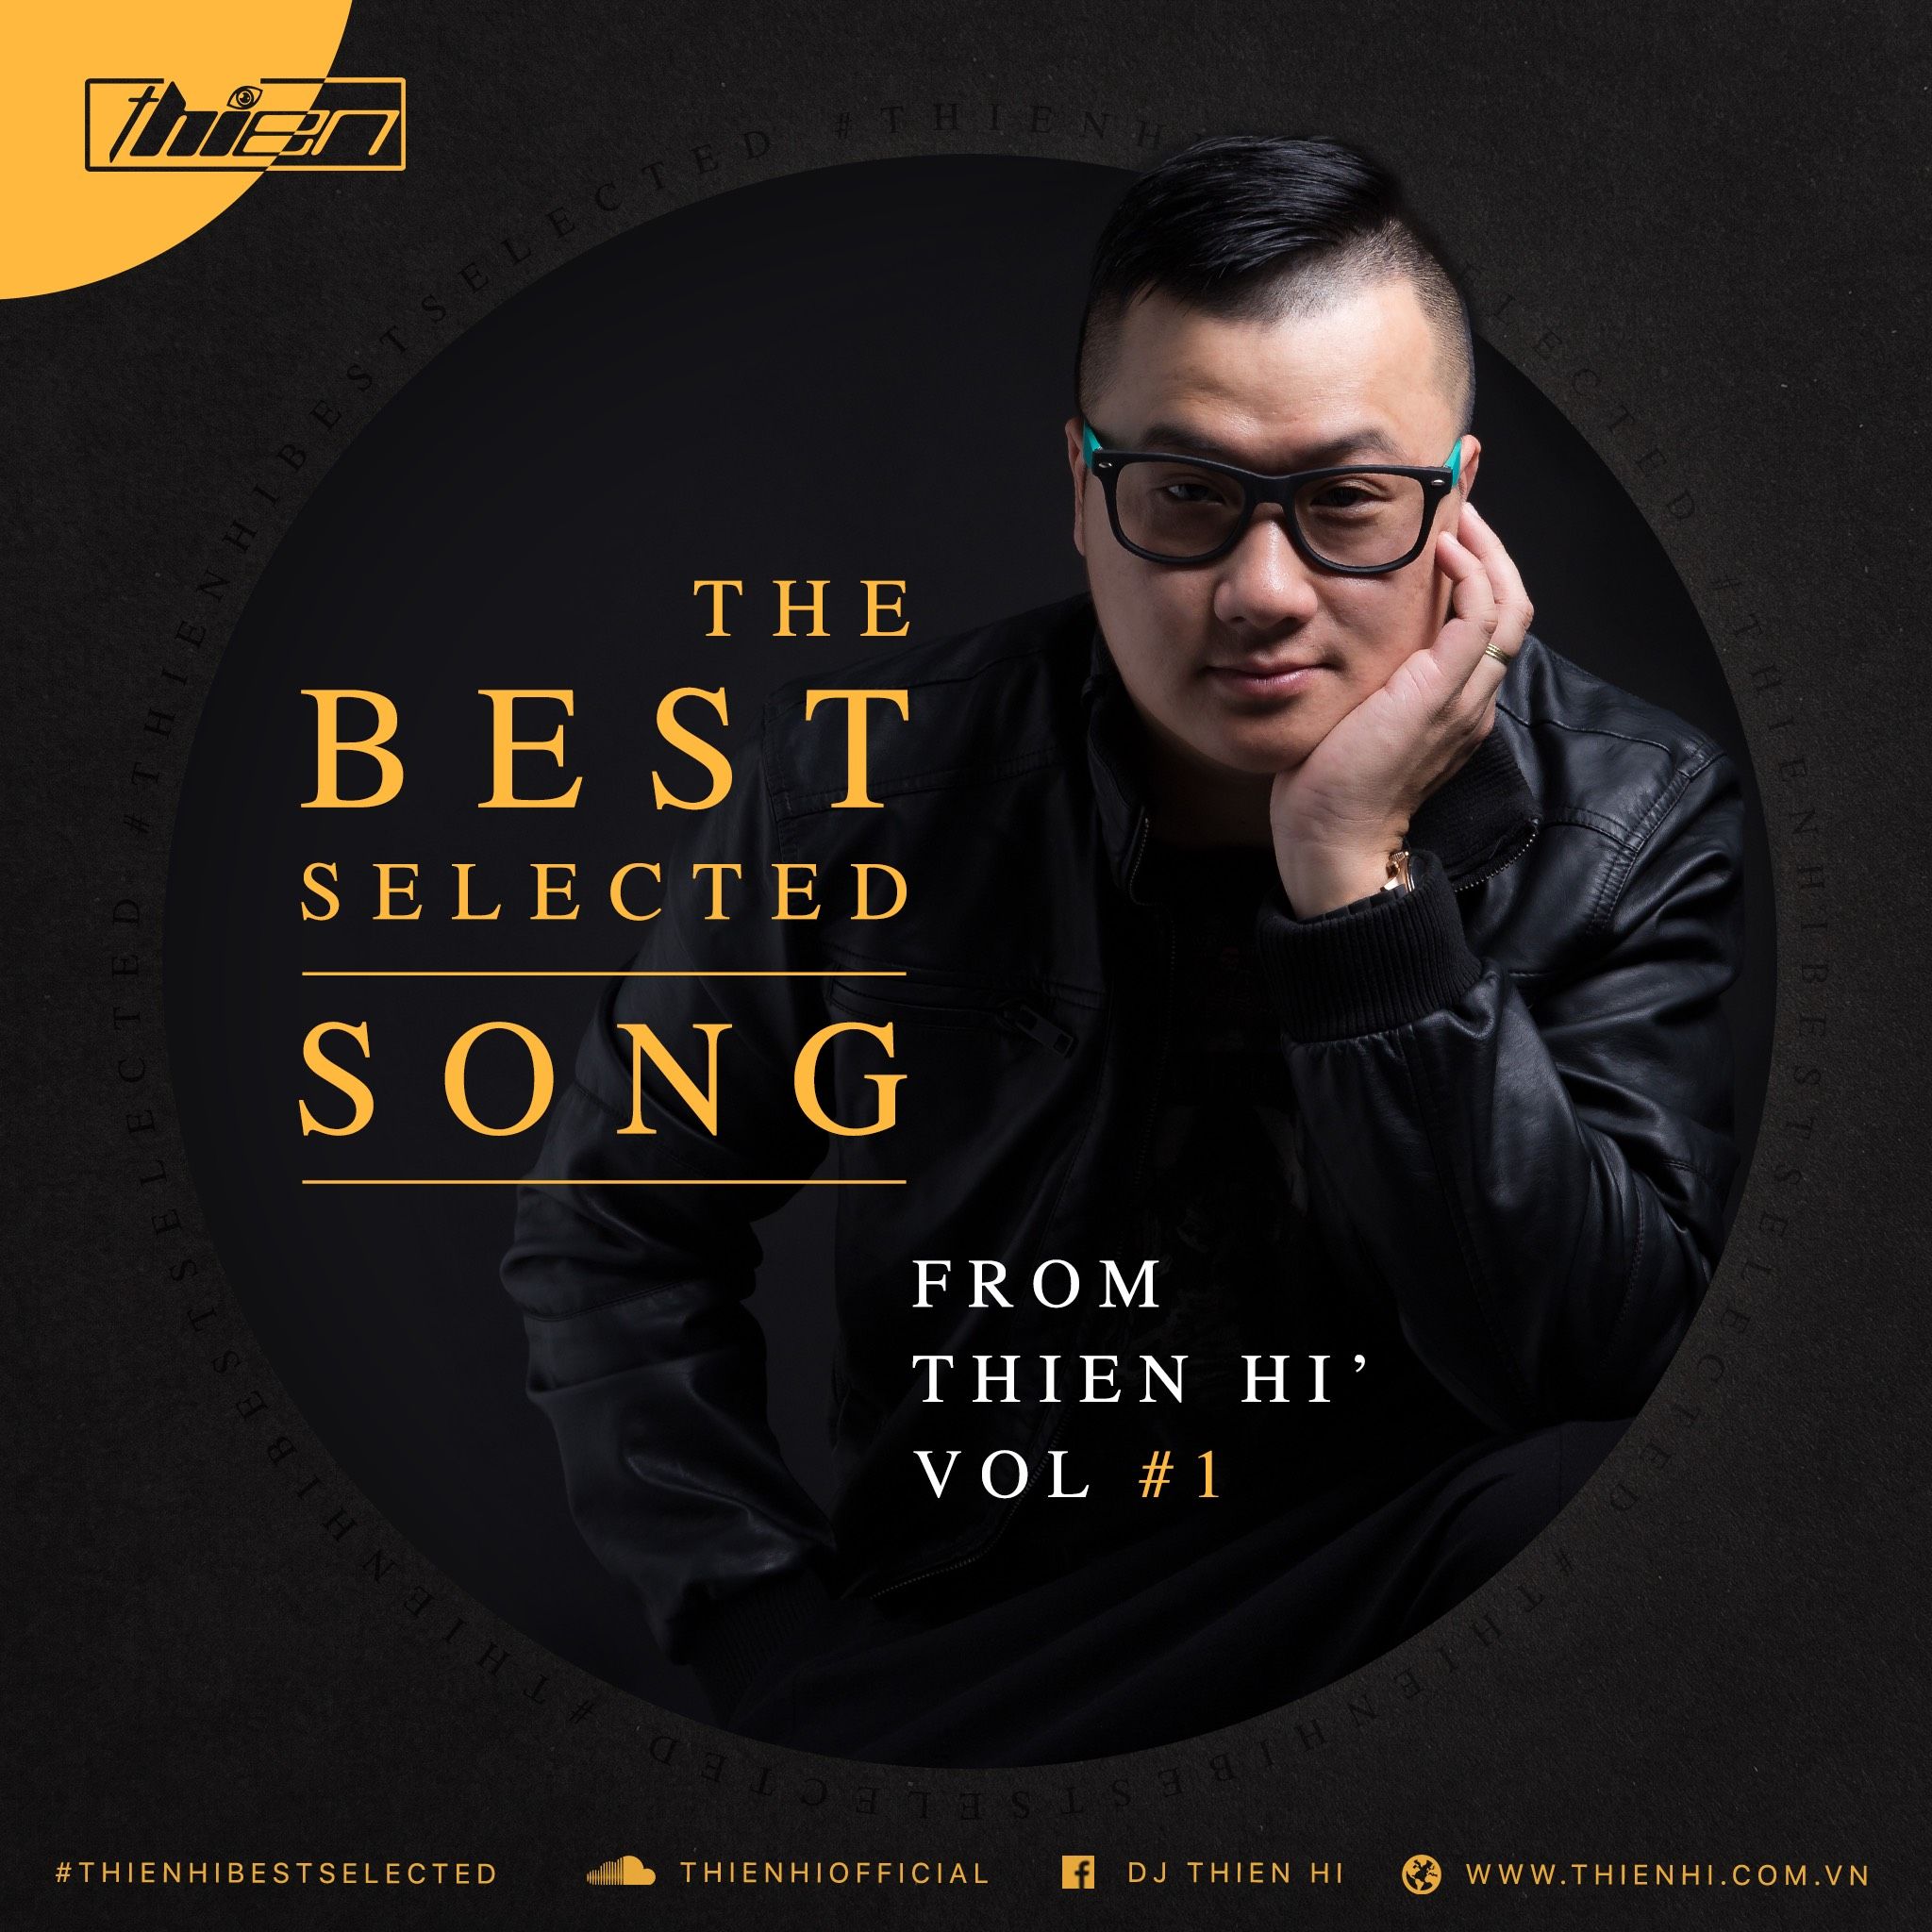 Ladda ner Thien Hi - The Best Selected Song #1